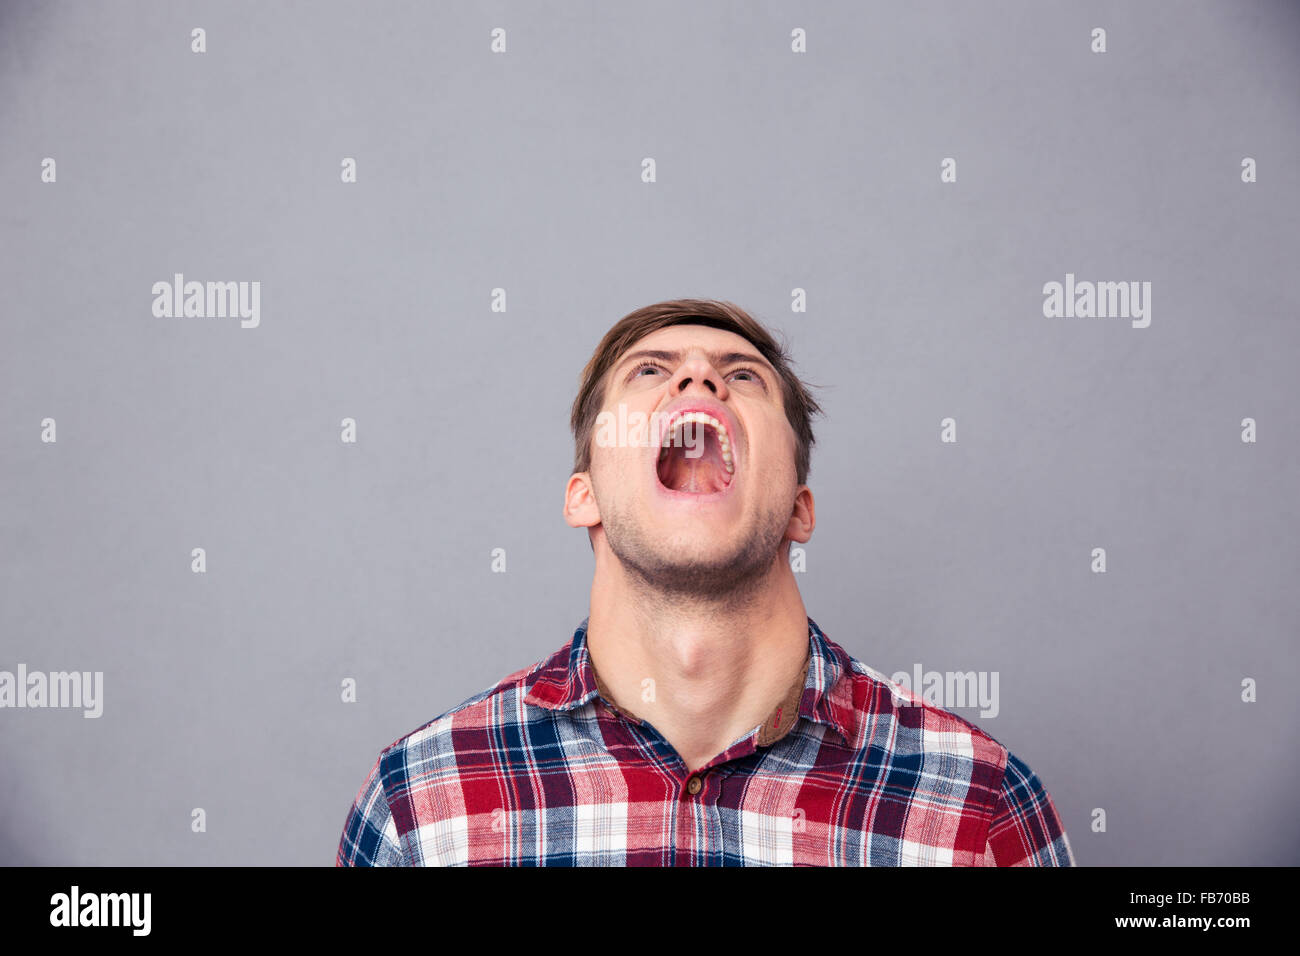 Despaired angry young man in plaid shirt looking up and screaming over grey background Stock Photo